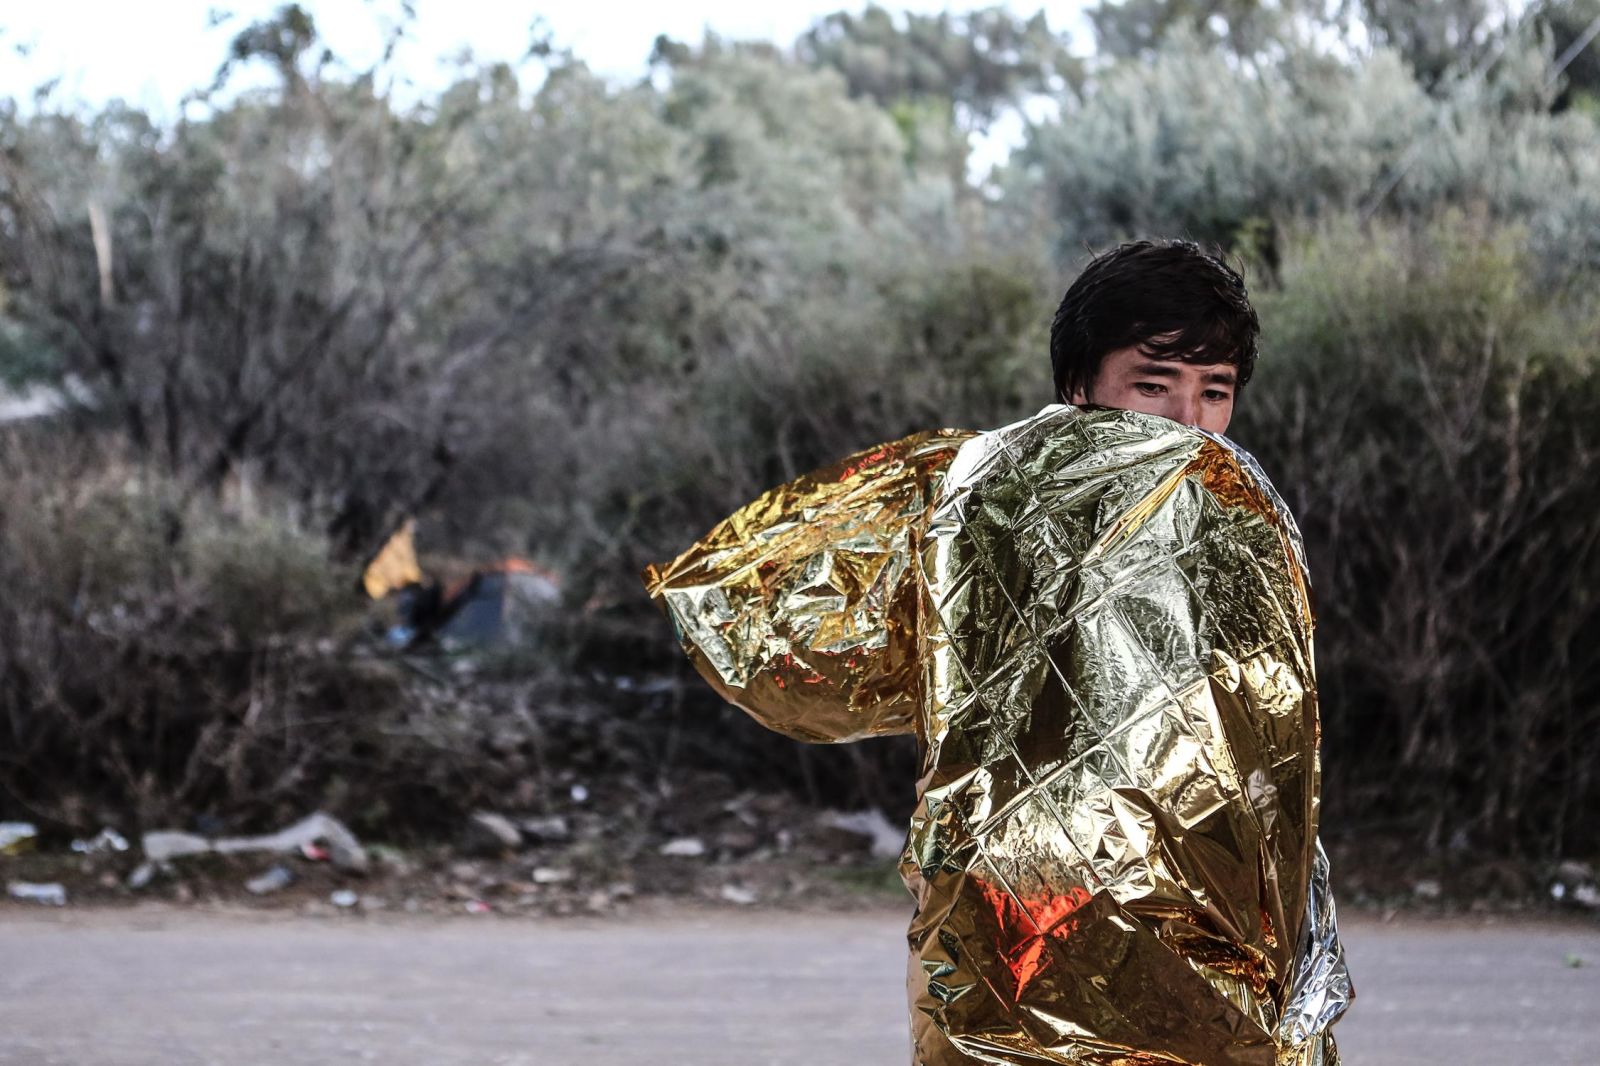 Lesbos, Greece on October 18, 2015. / Λέσβος, 18 Οκτωβρίου 2015.